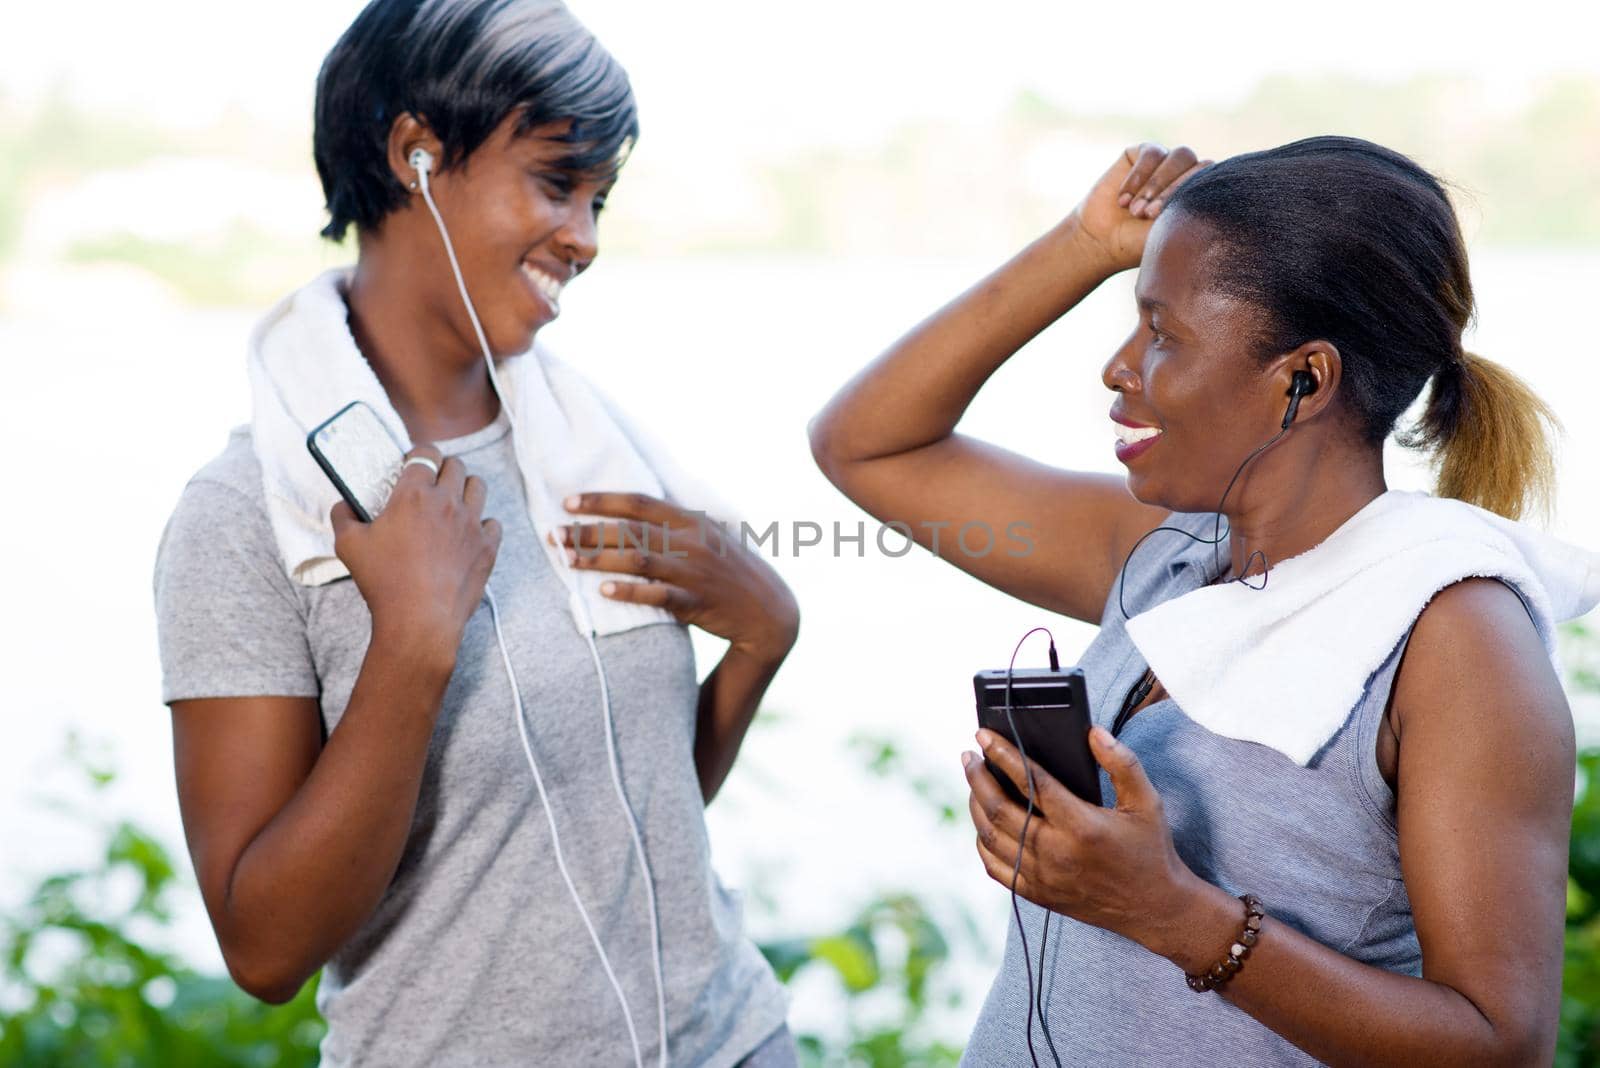 young women standing listening to music after sport smiling.